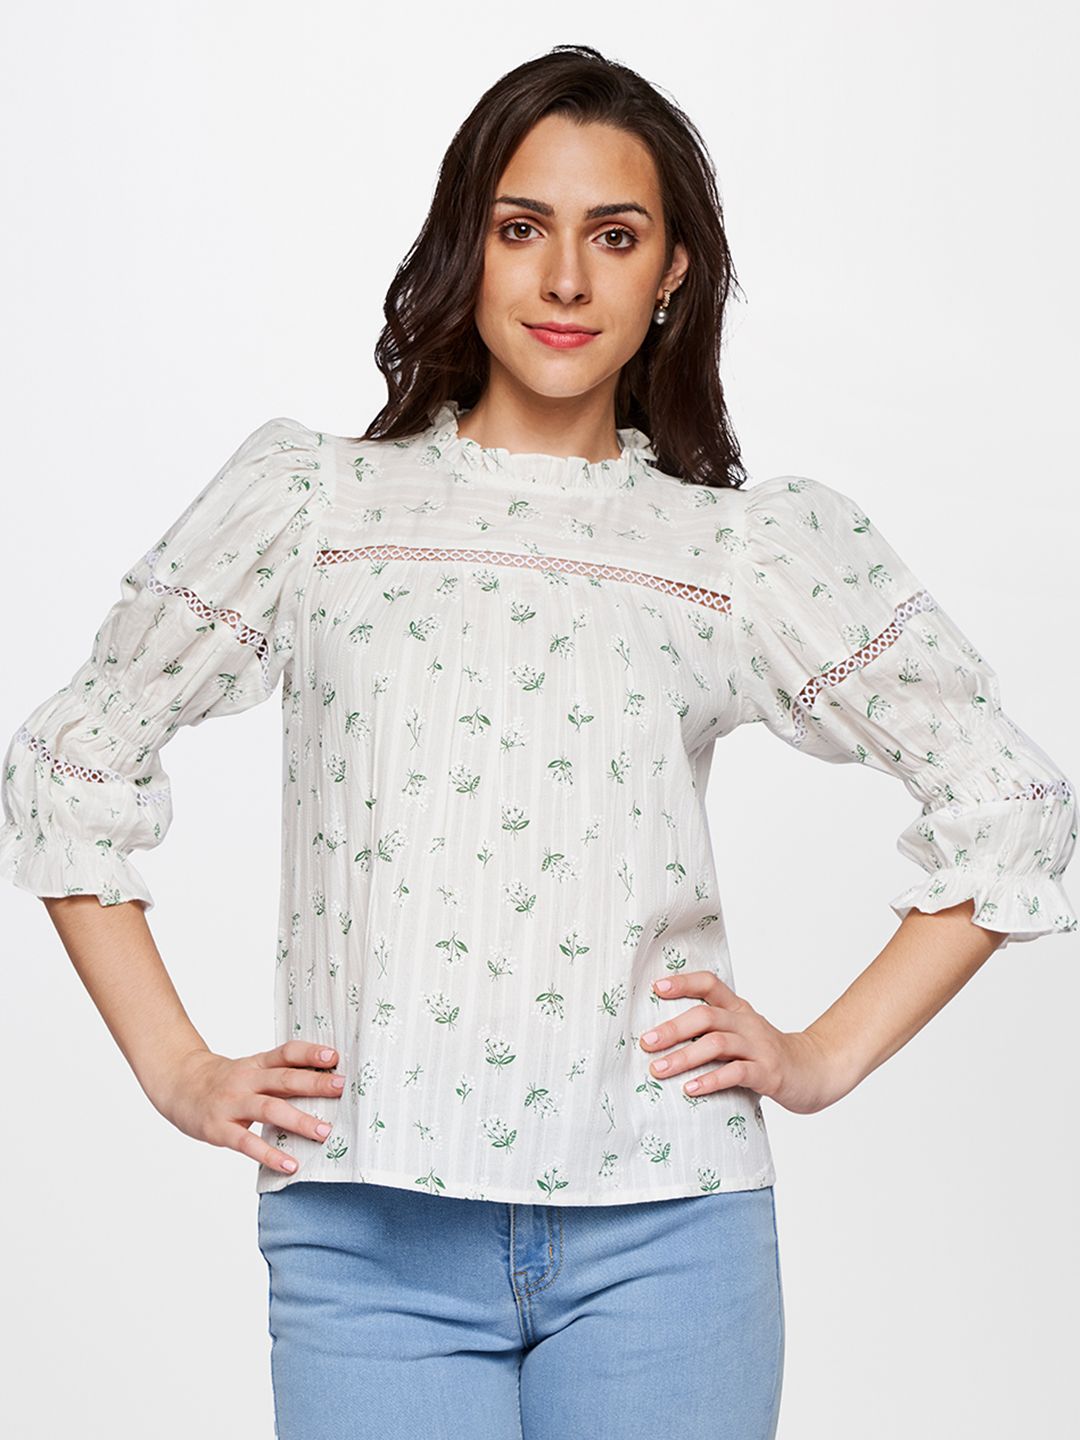 AND Floral Print Pure Cotton Top Price in India